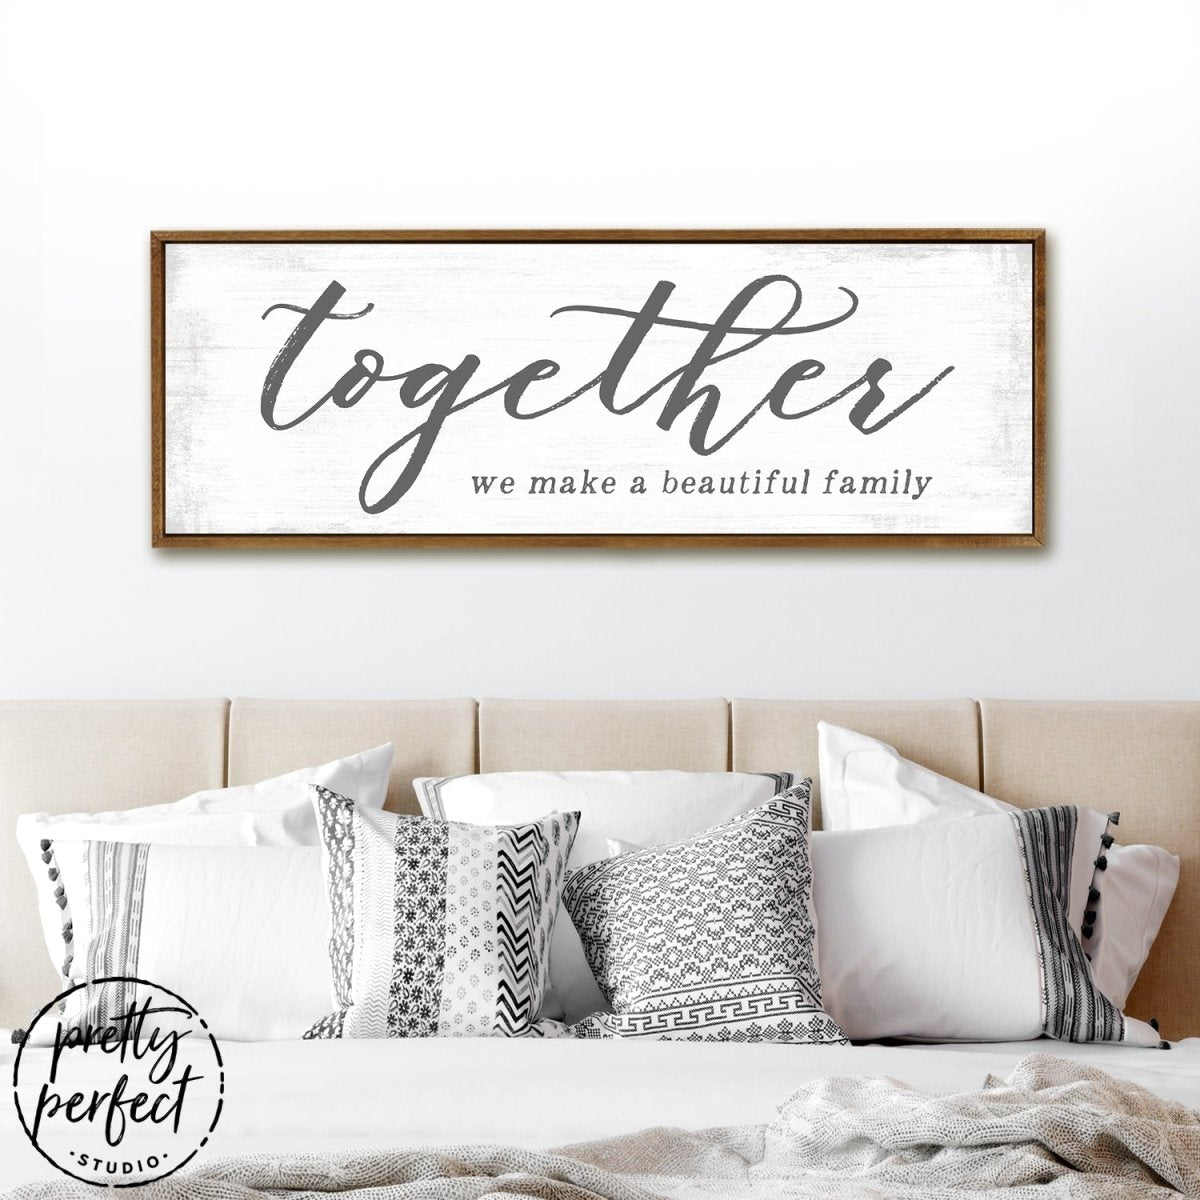 Together We Make A Beautiful Family Sign Above Bed - Pretty Perfect Studio